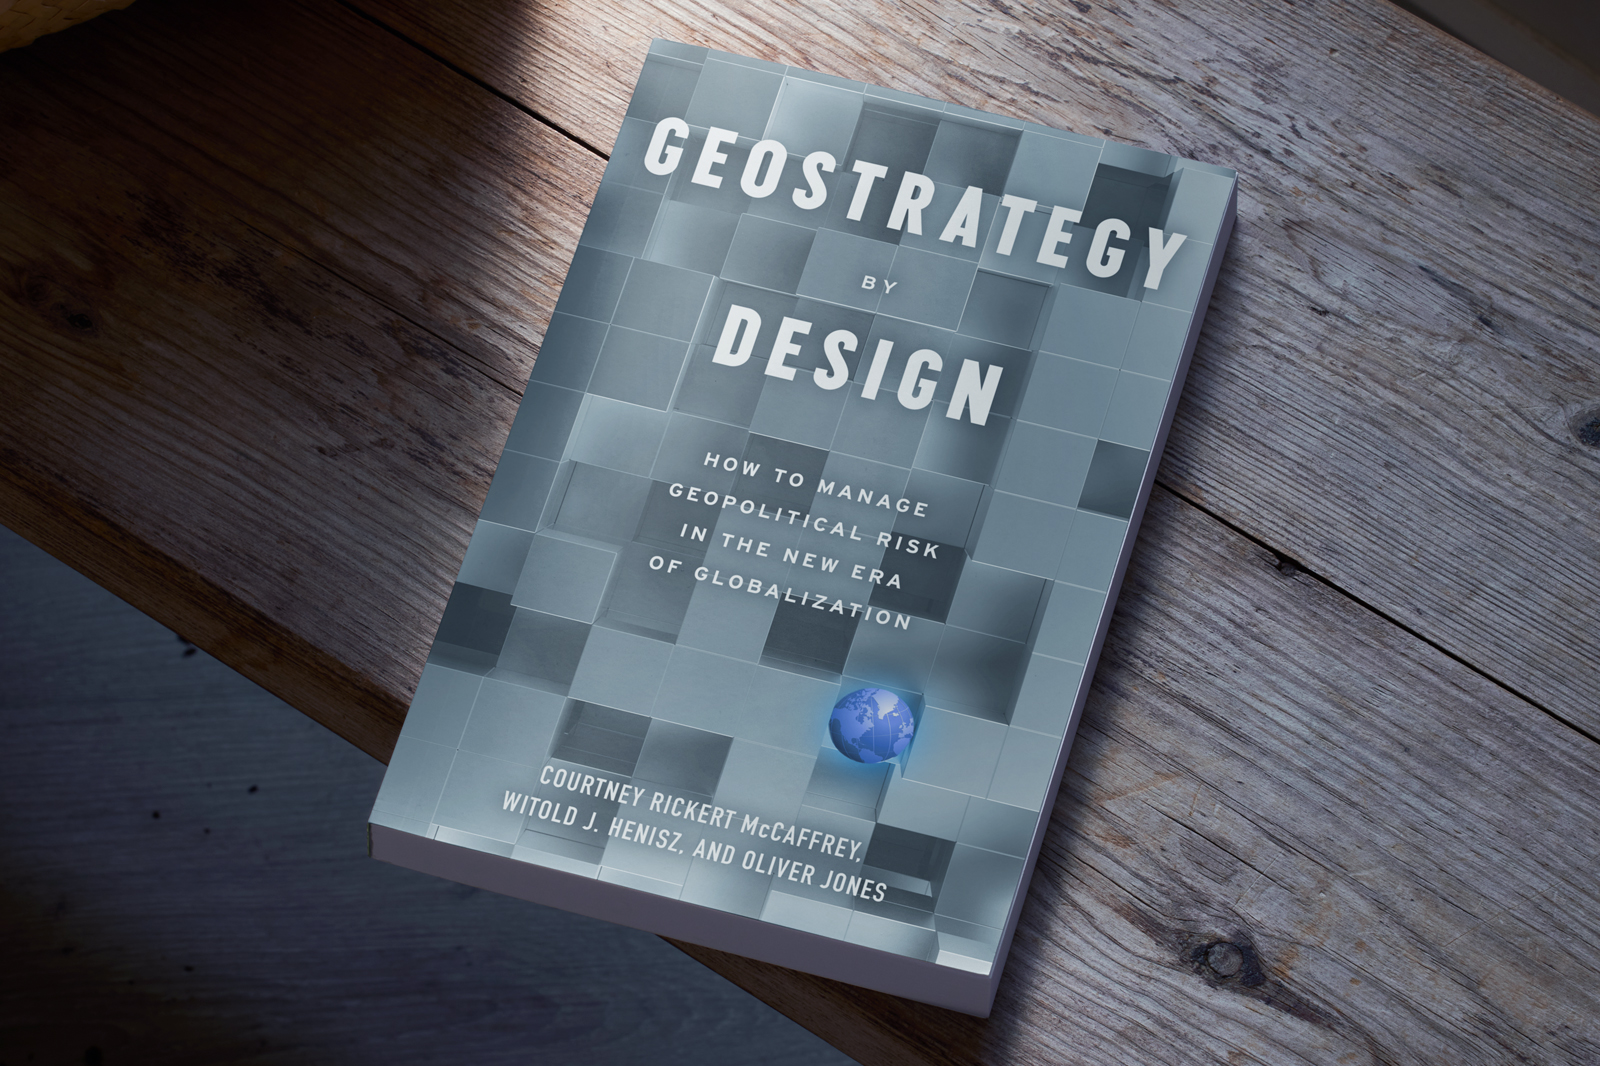 Geostrategy by design book